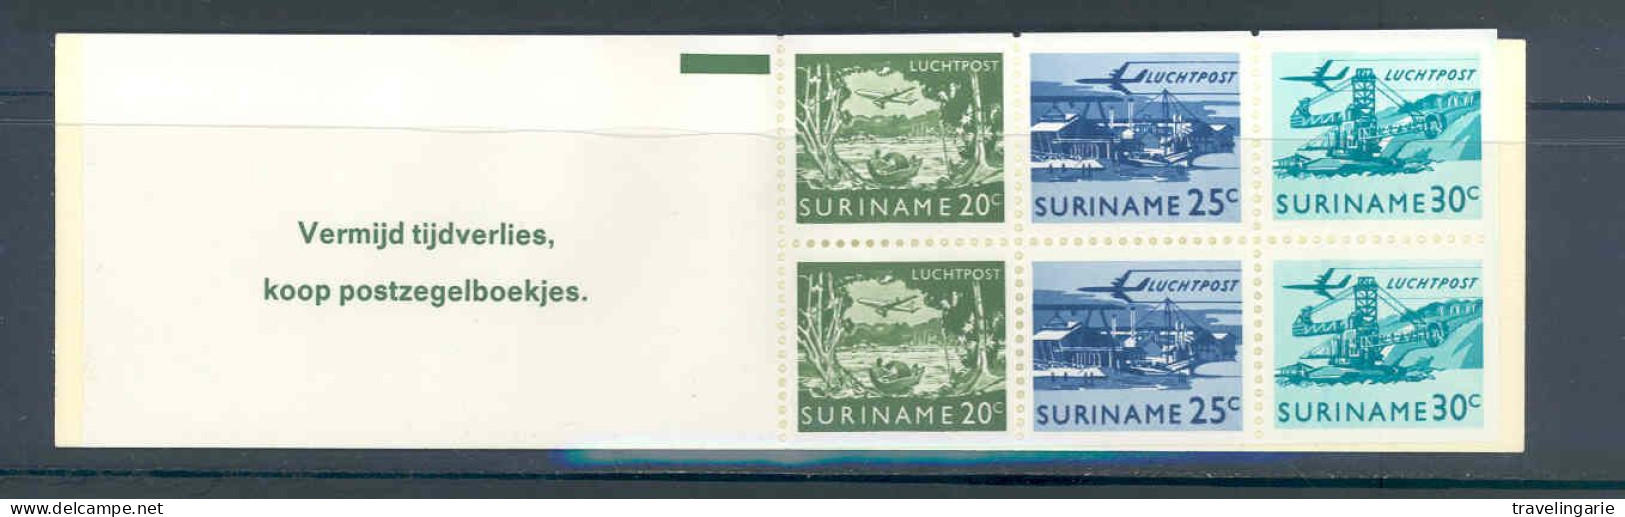 Suriname 1976 Airmail Stamp Booklet MNH/** - Suriname